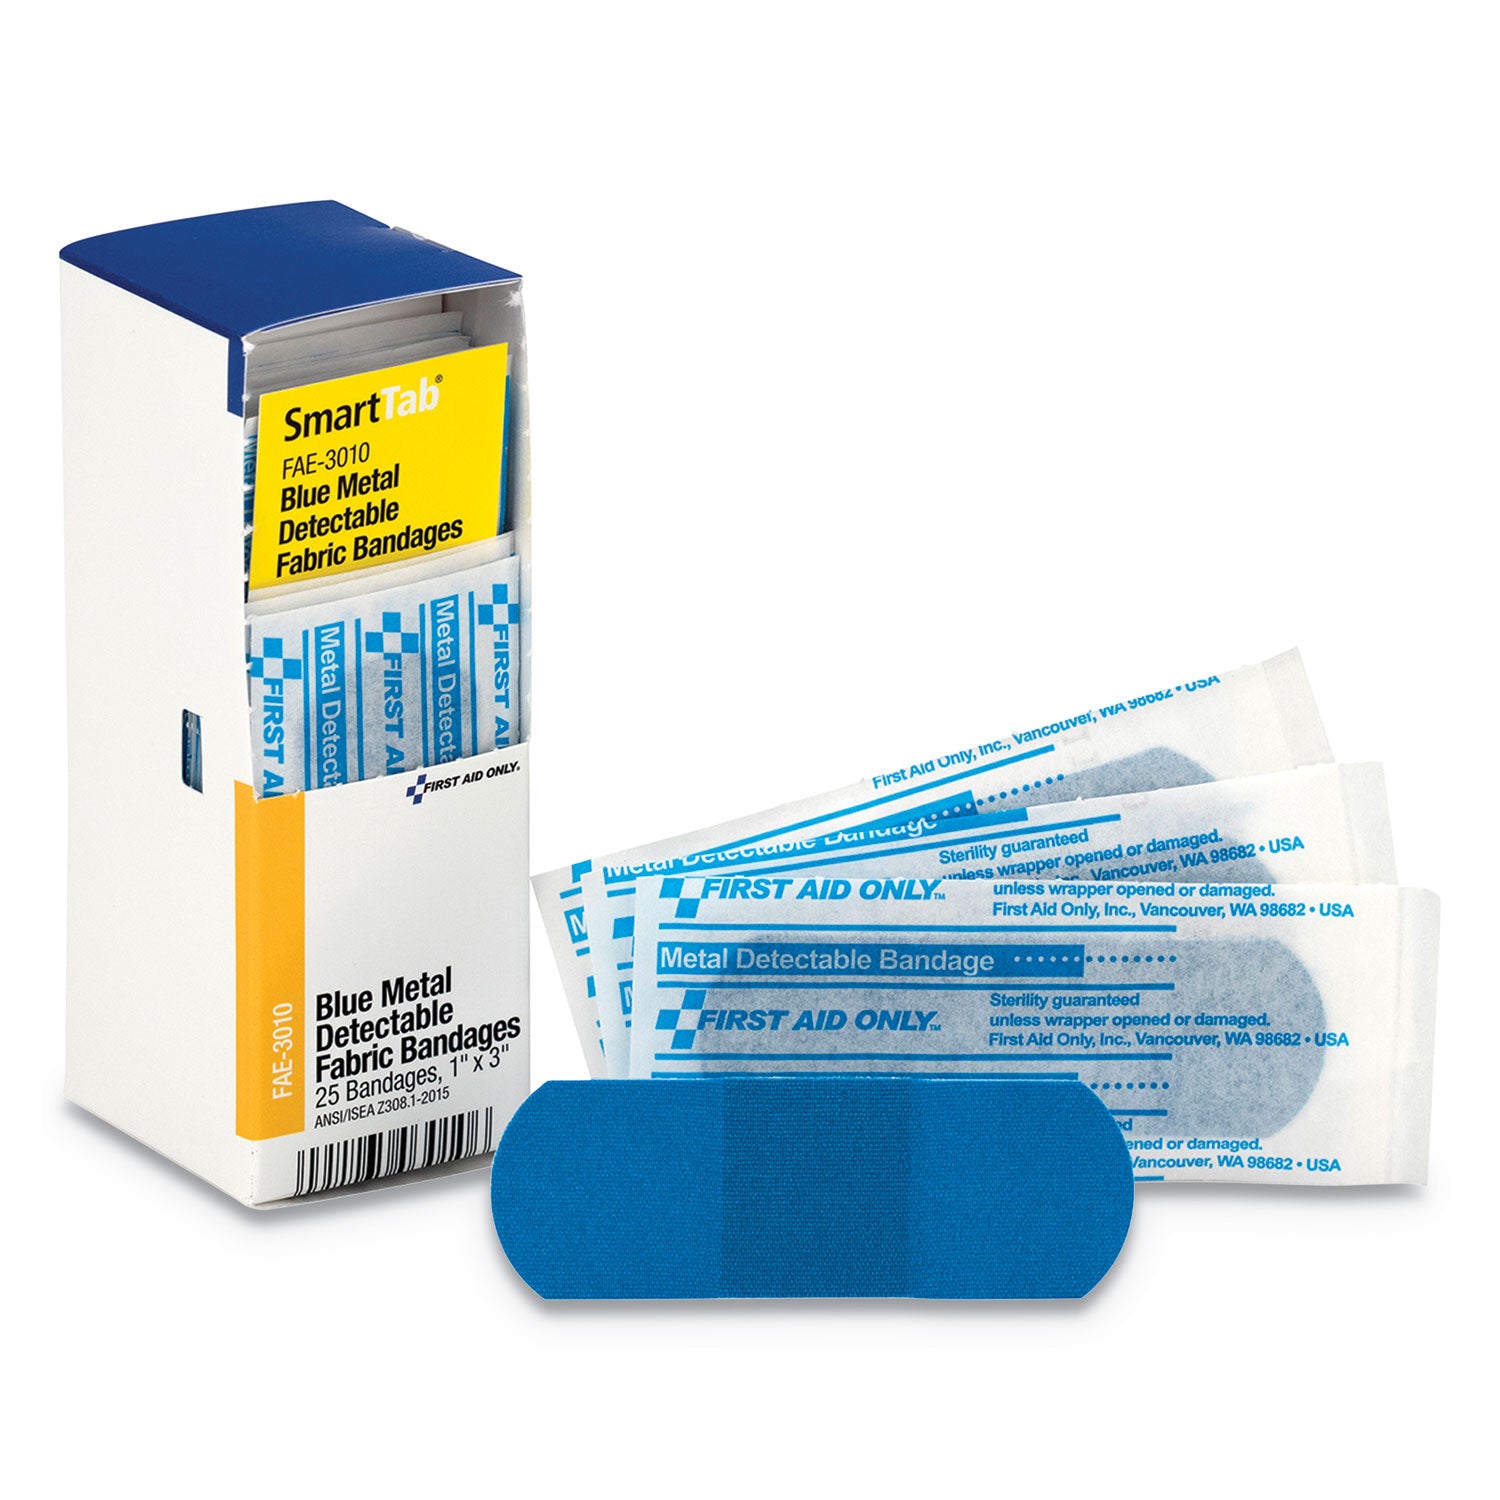 refill-for-smartcompliance-general-cabinet-blue-metal-detectable-bandages1-x-3-25-box_faofae3010 - 1